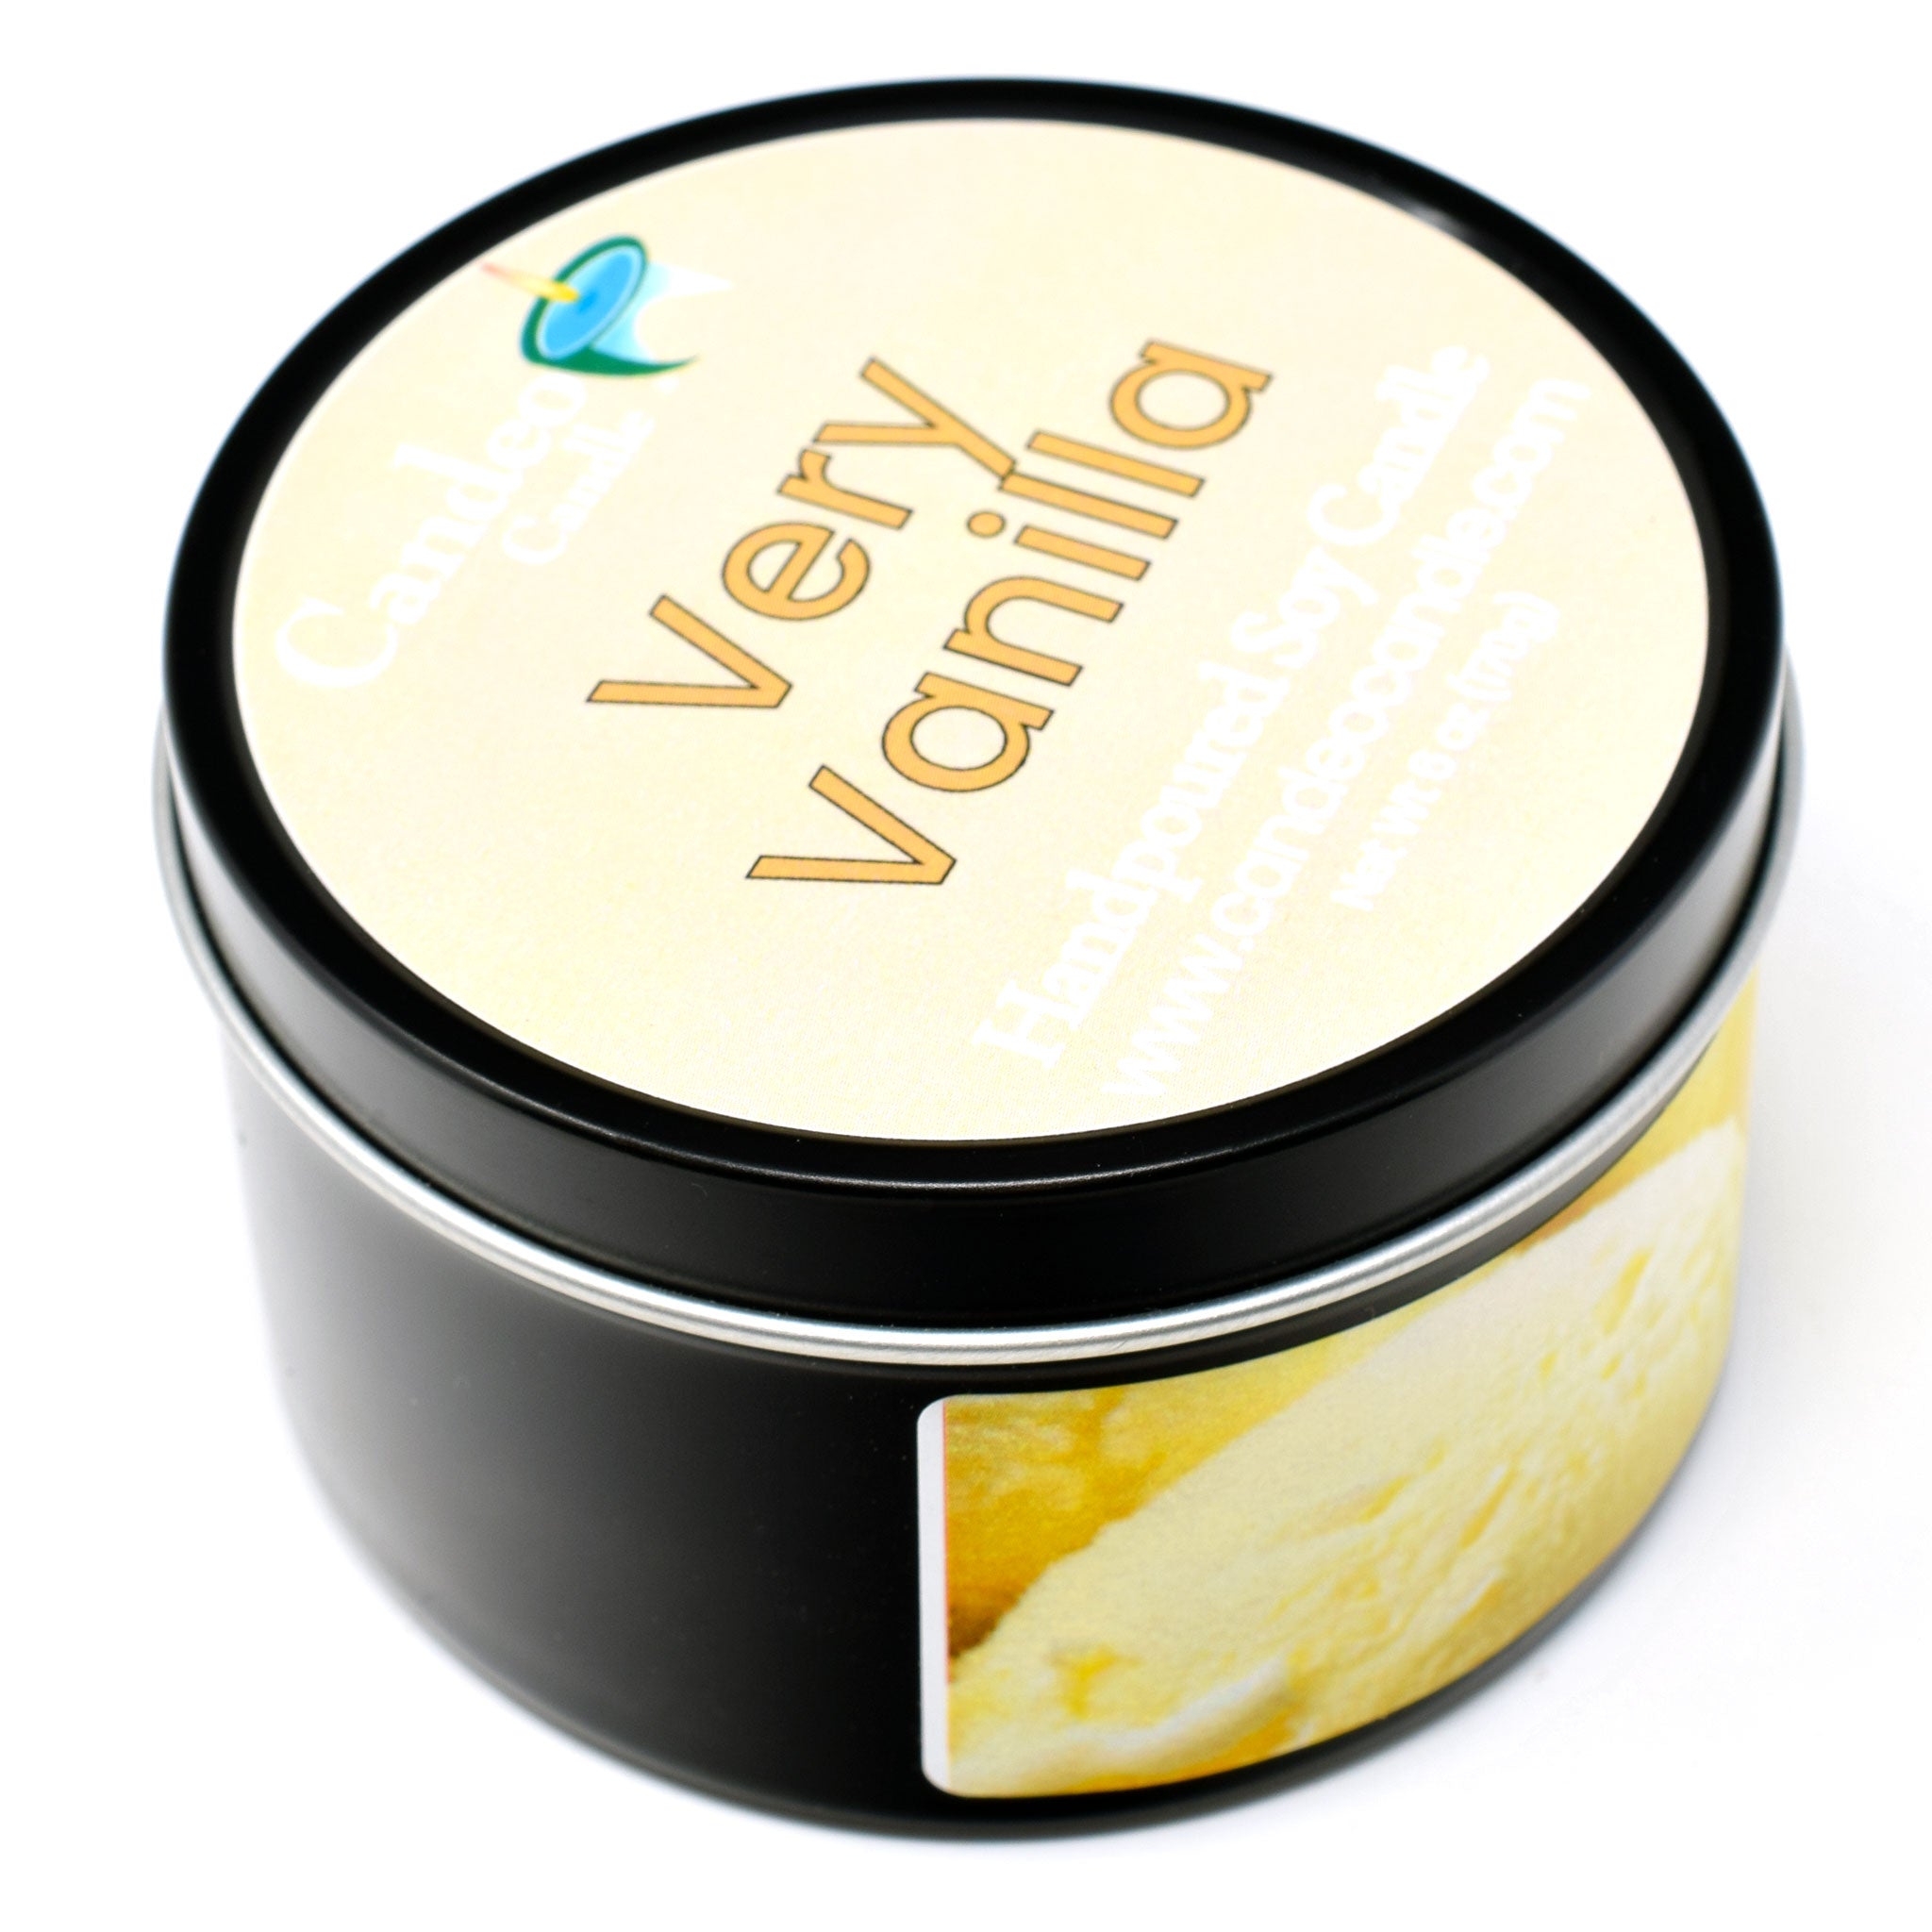 Very Vanilla, 6oz Soy Candle Tin - Candeo Candle